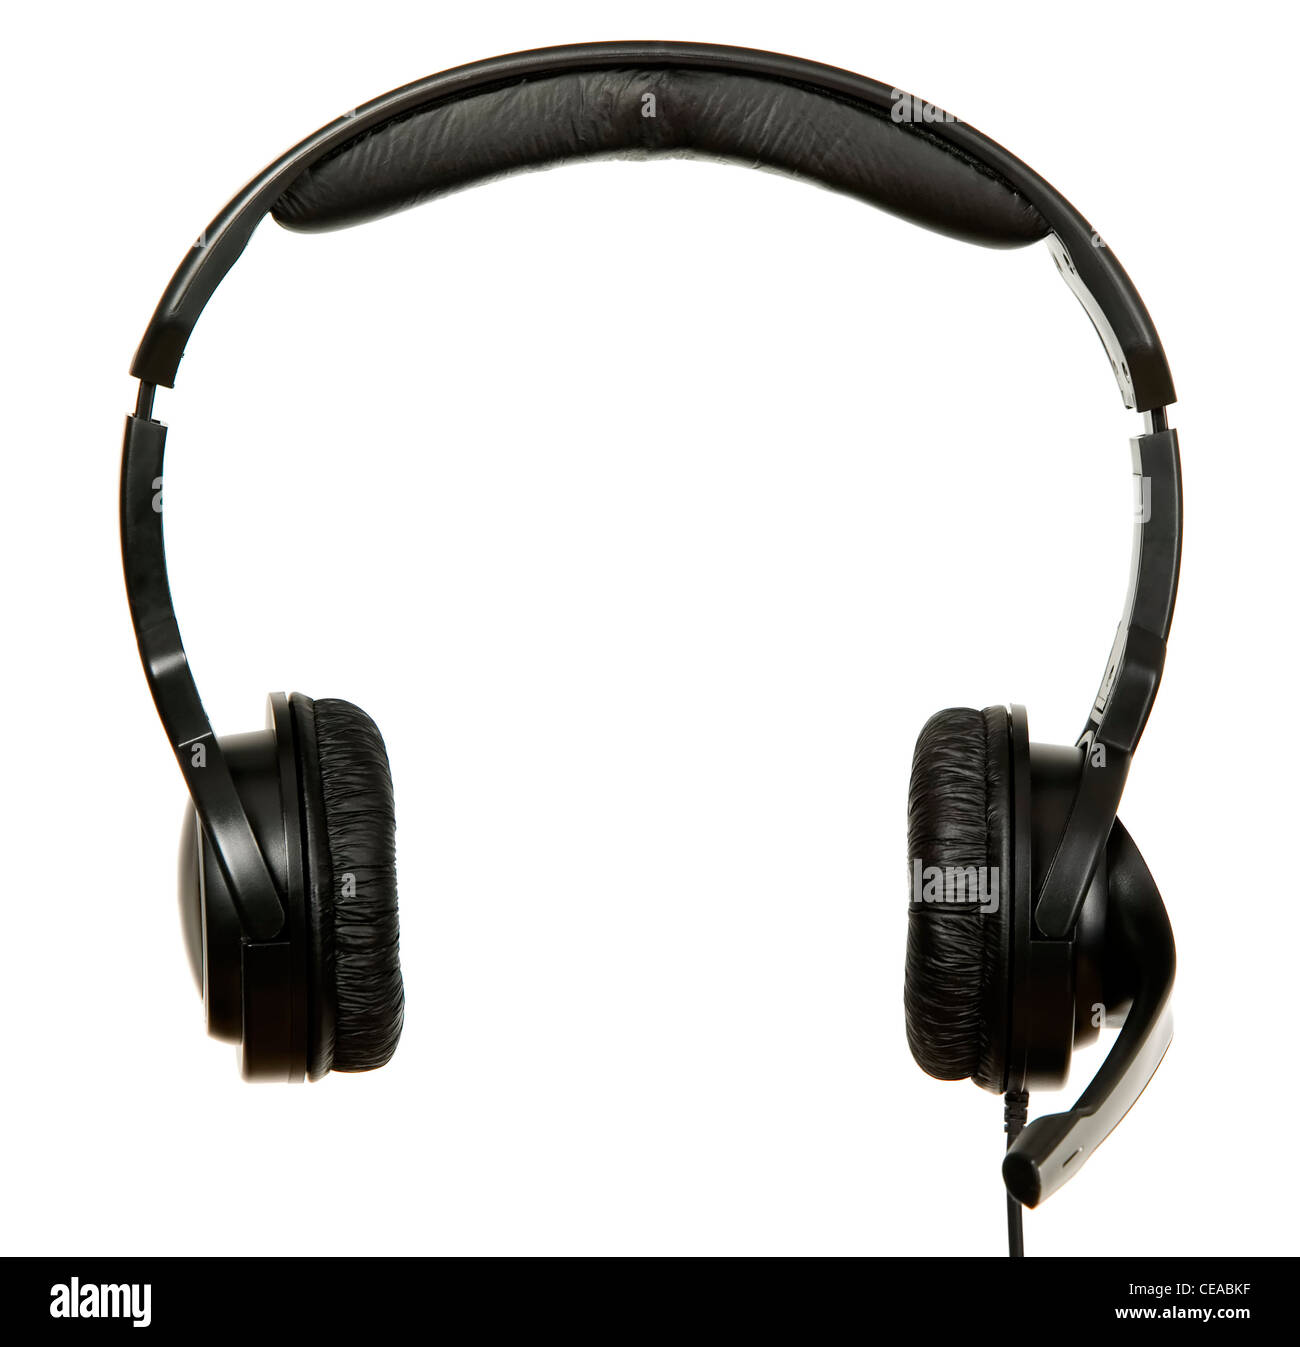 There is a black headphones with microphone Stock Photo